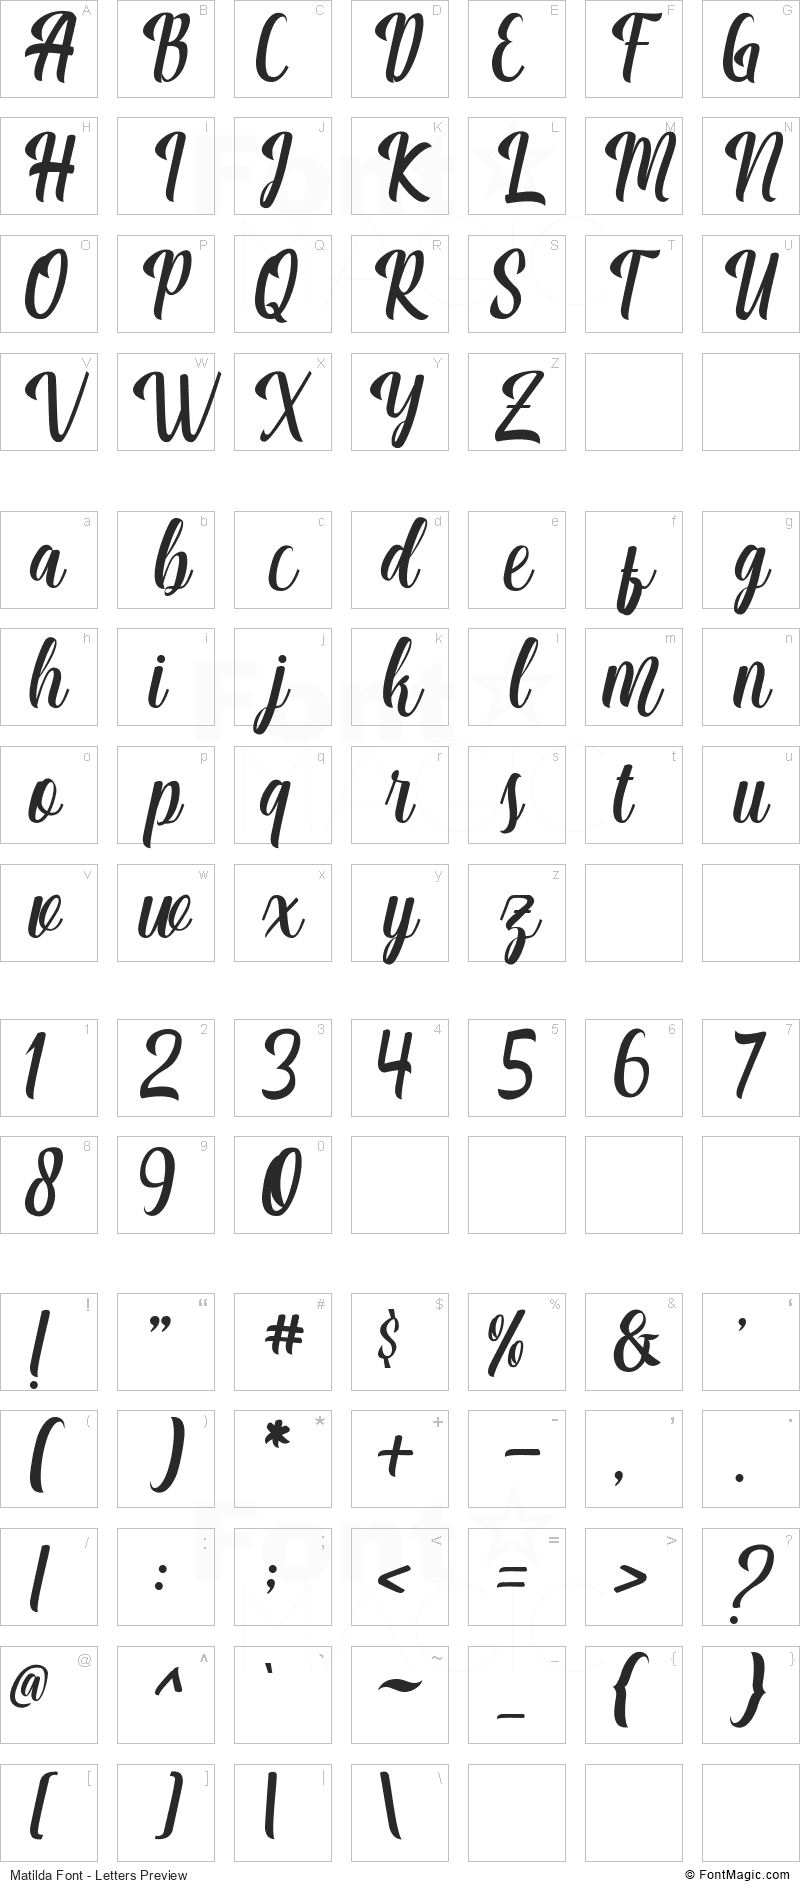 Matilda Font - All Latters Preview Chart